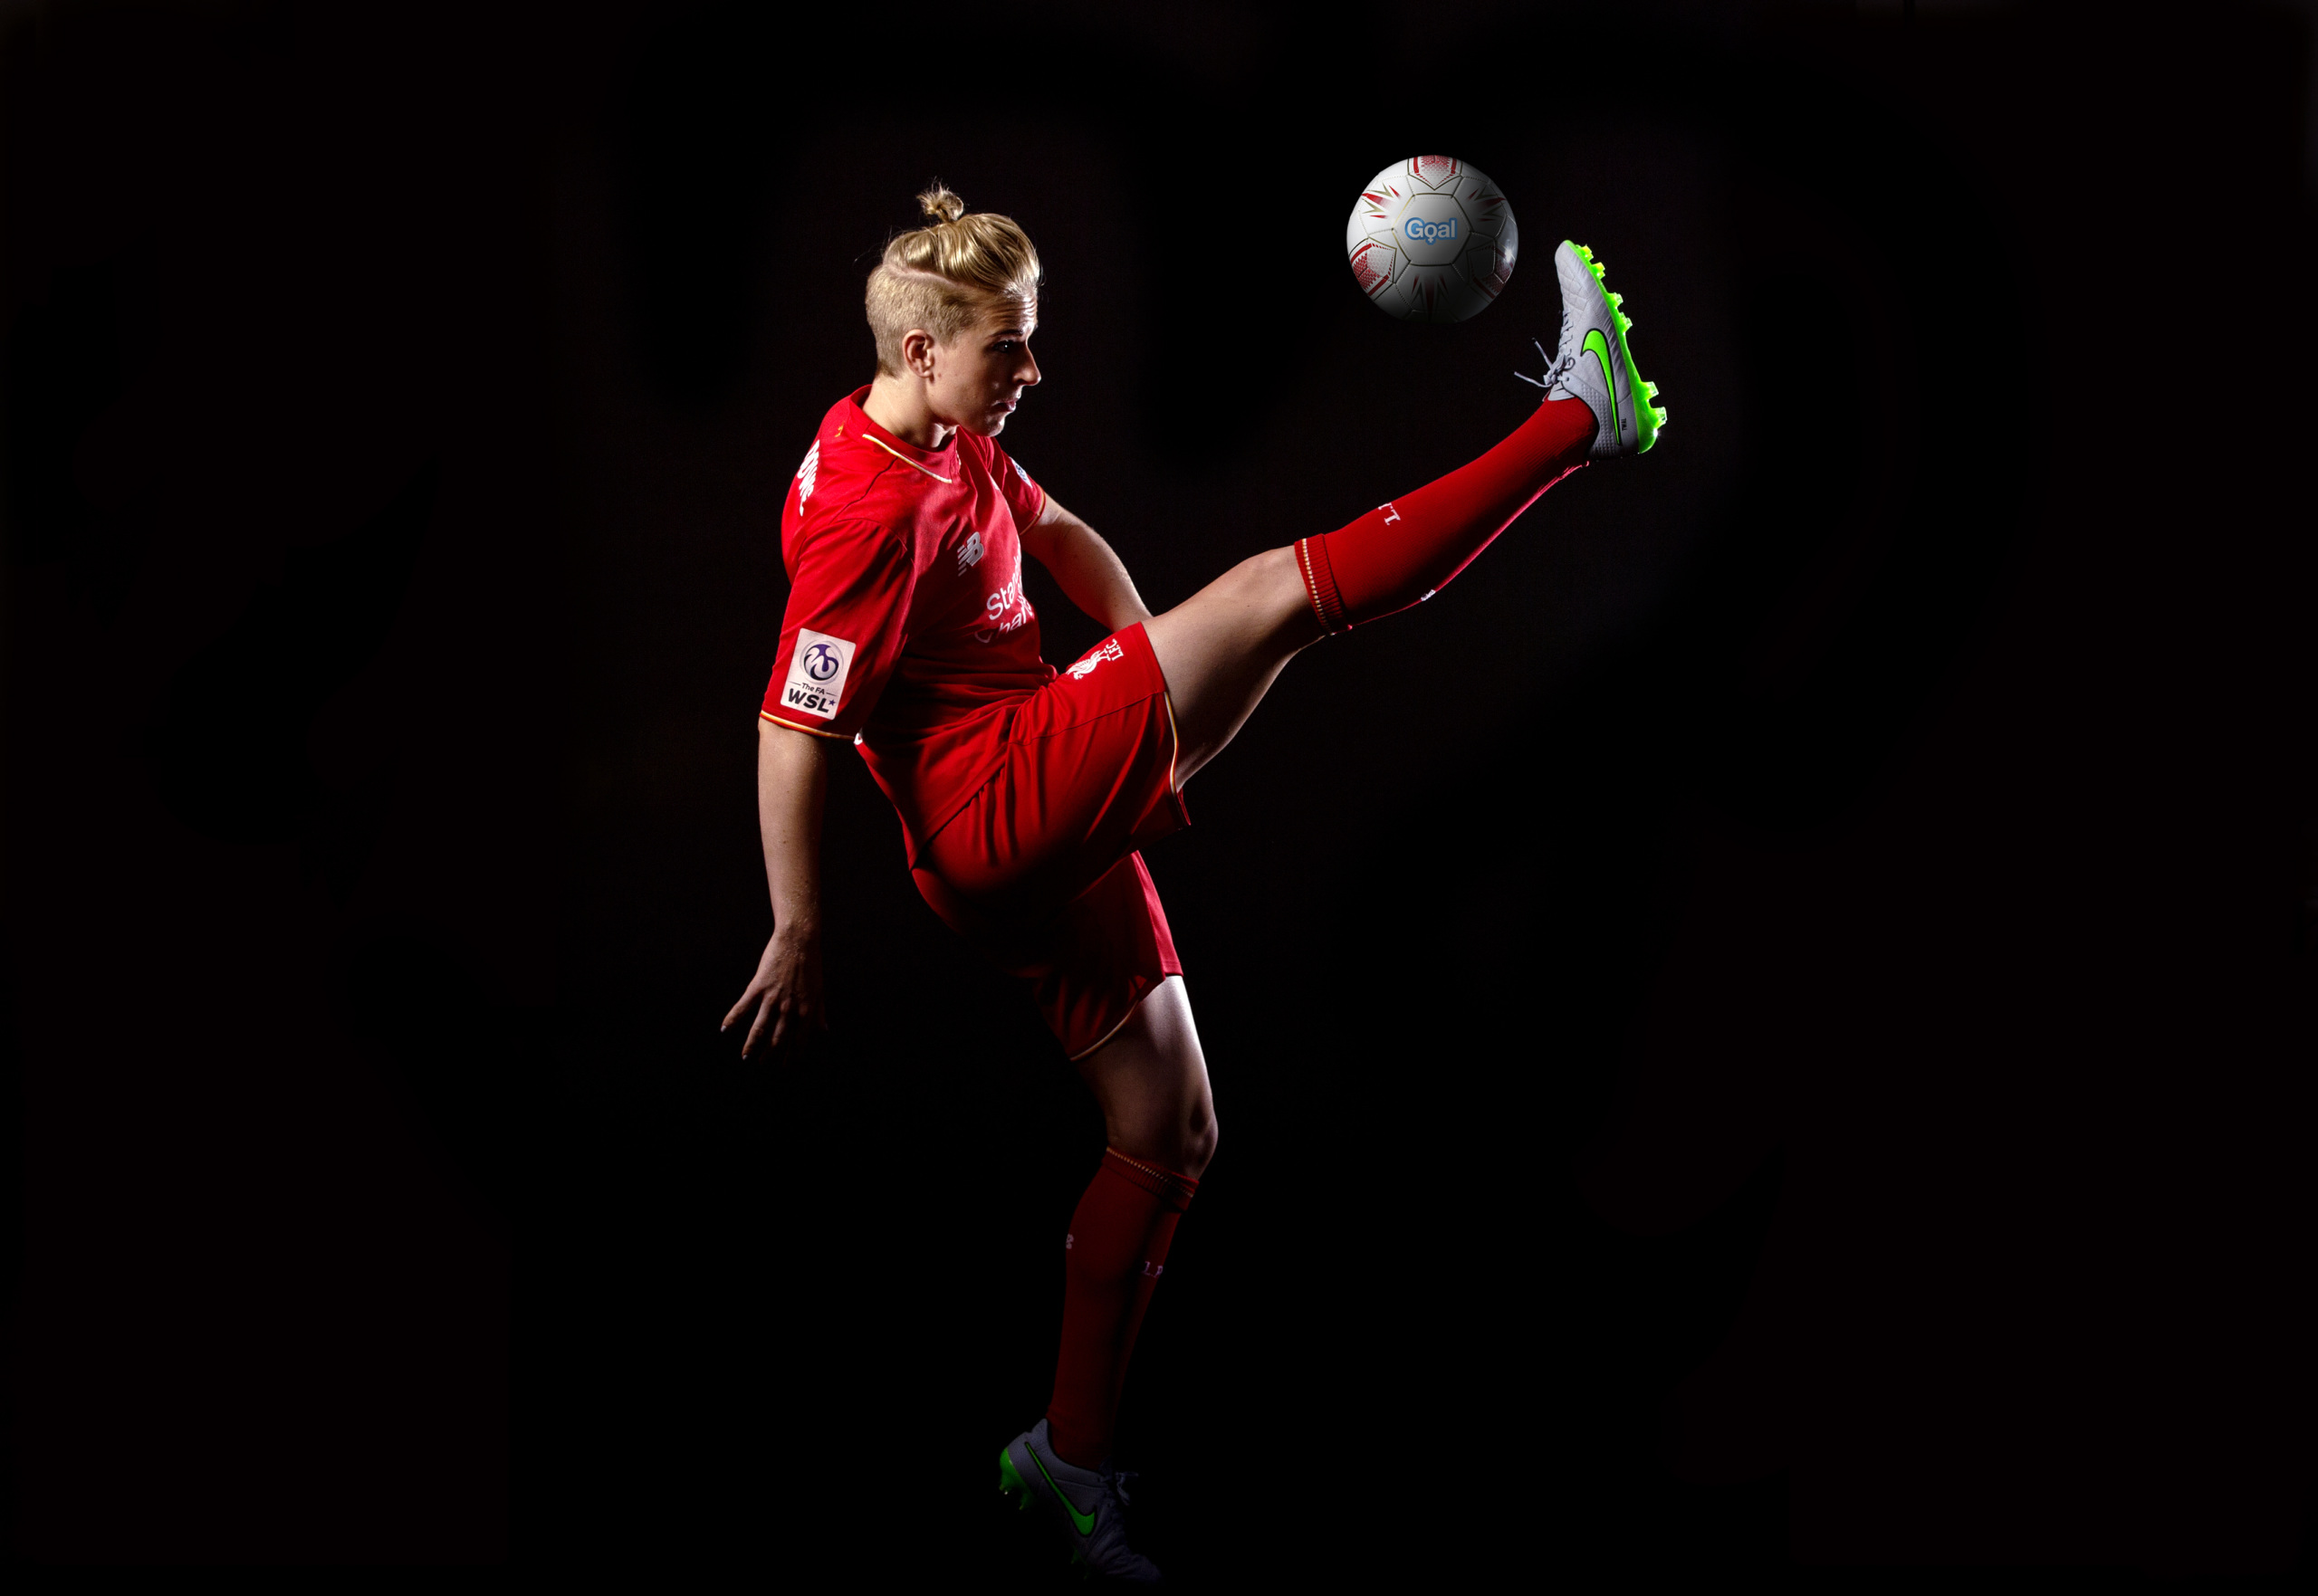 Natasha Dowie of Liverpool Ladies FC at the launch of the Standard Chartered #ThisGirlsGoal campaign 1